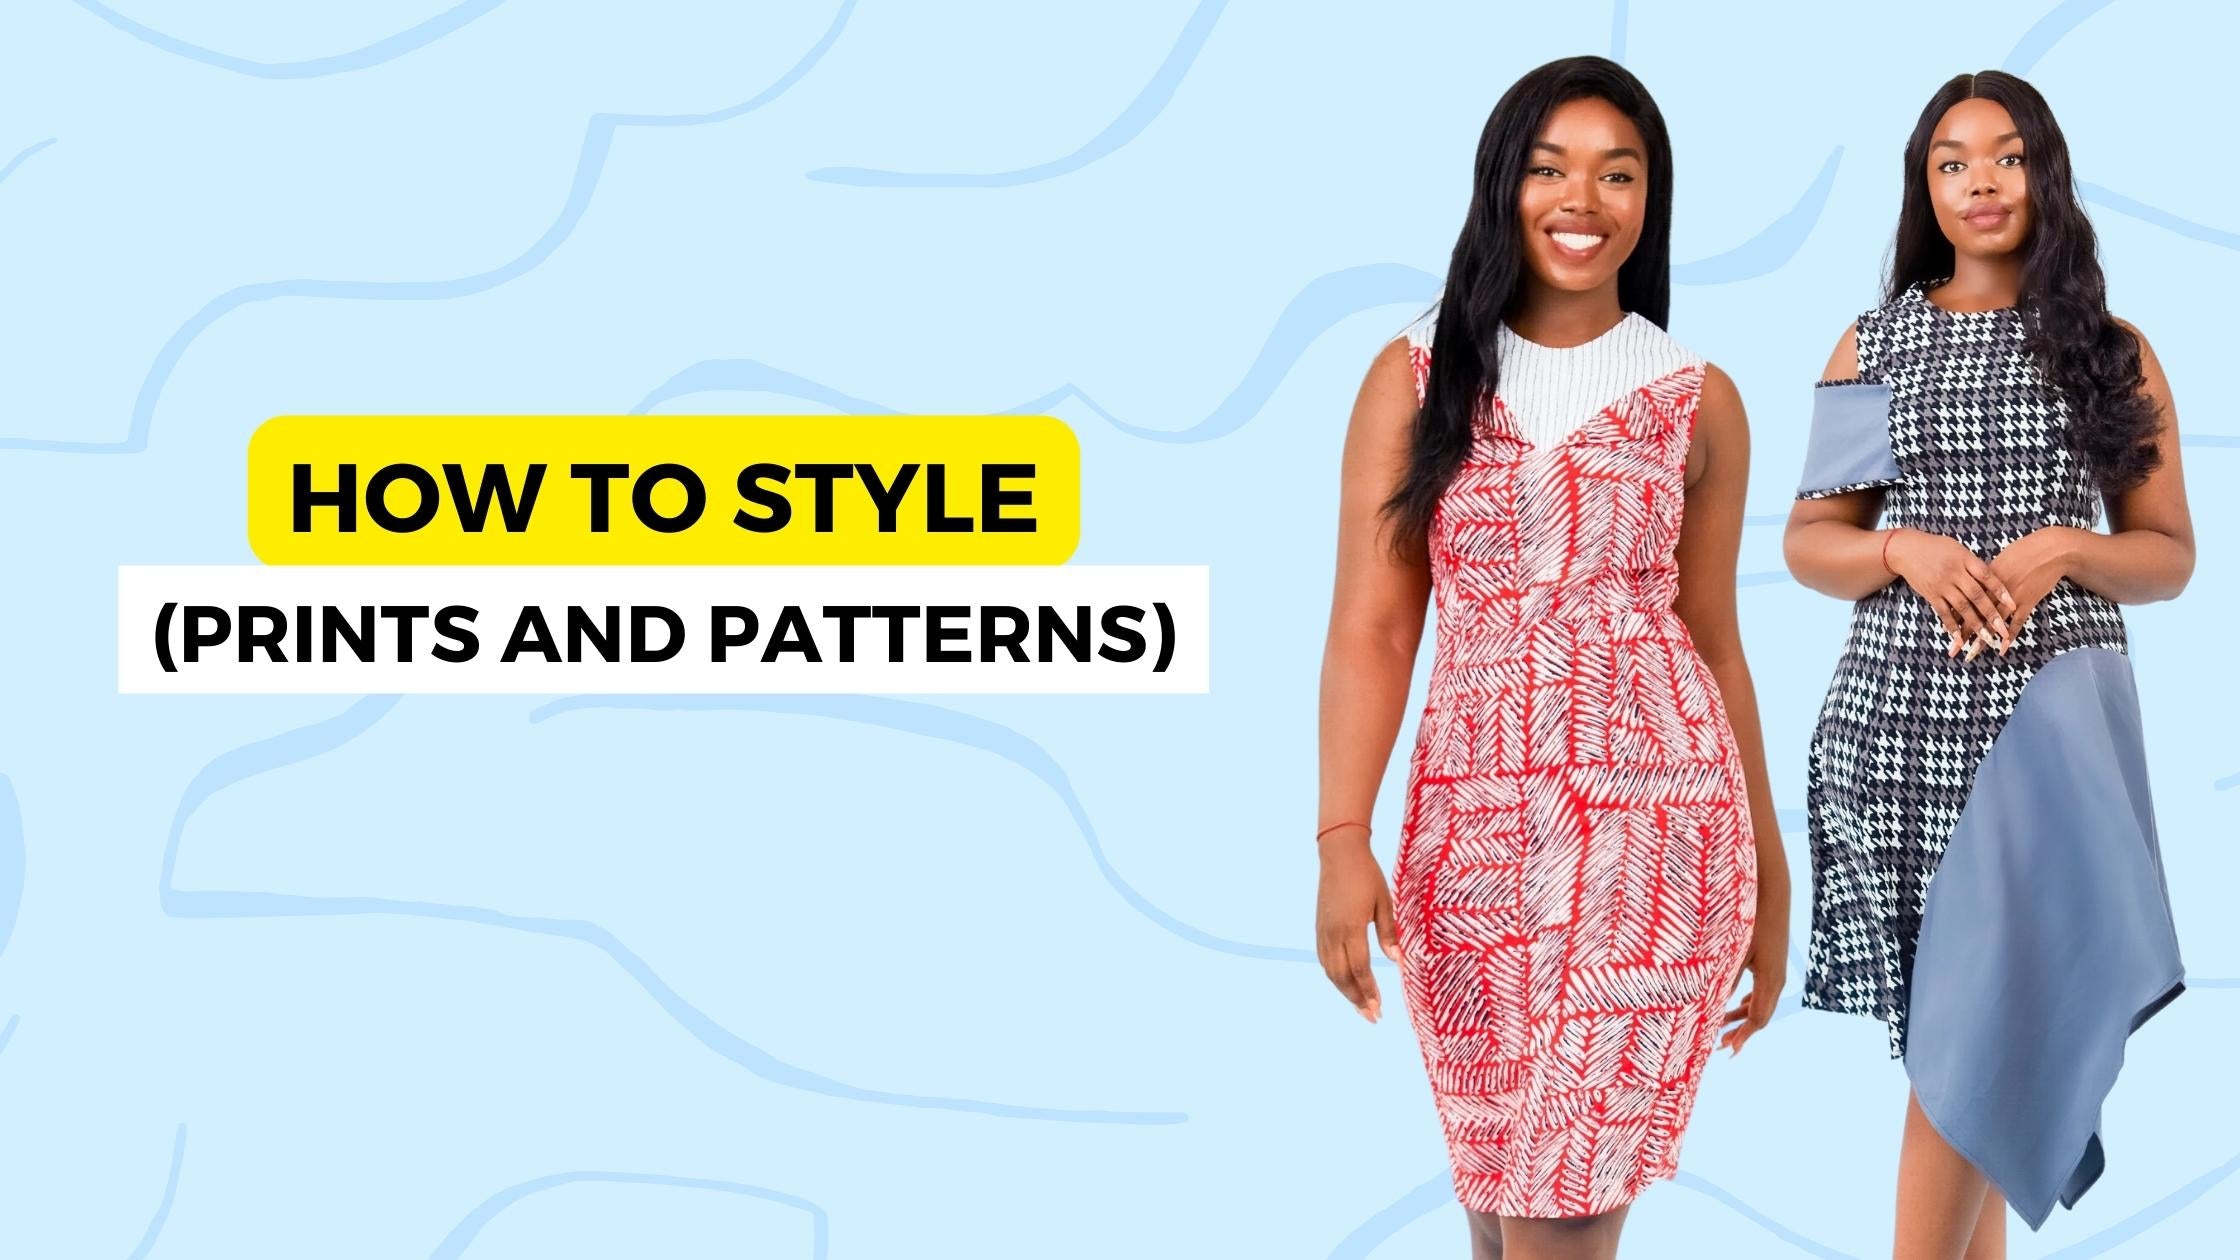 How to Style (Prints and Patterns)